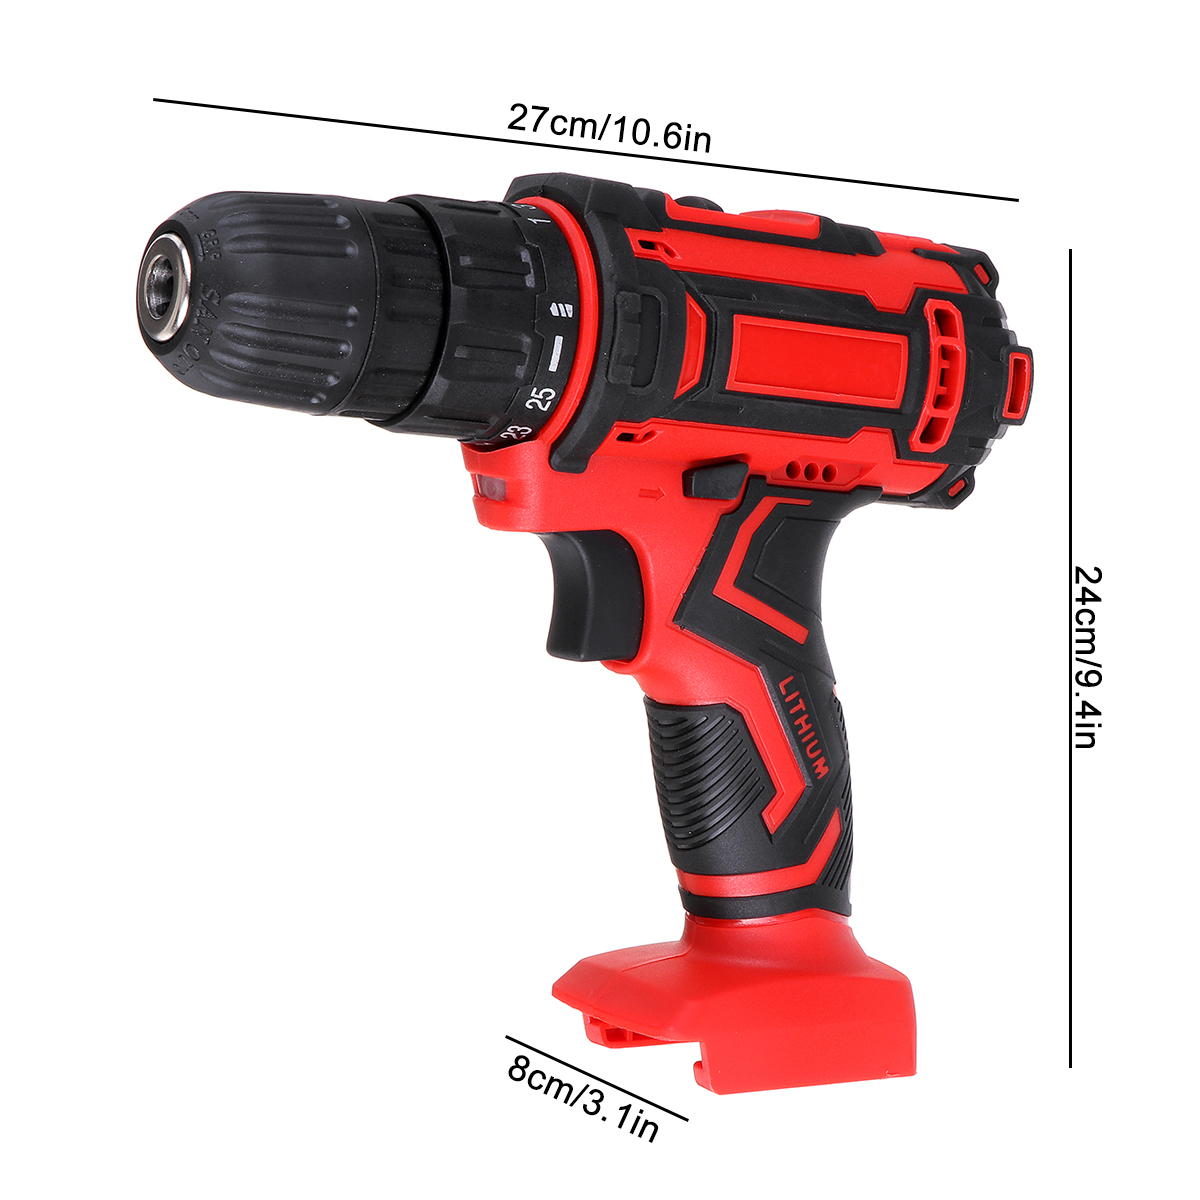 520NM-Cordless-Electric-Drill-Screwdriver-2-Speeds-Fit-For-Makita-18-21V-Battery-1749062-7